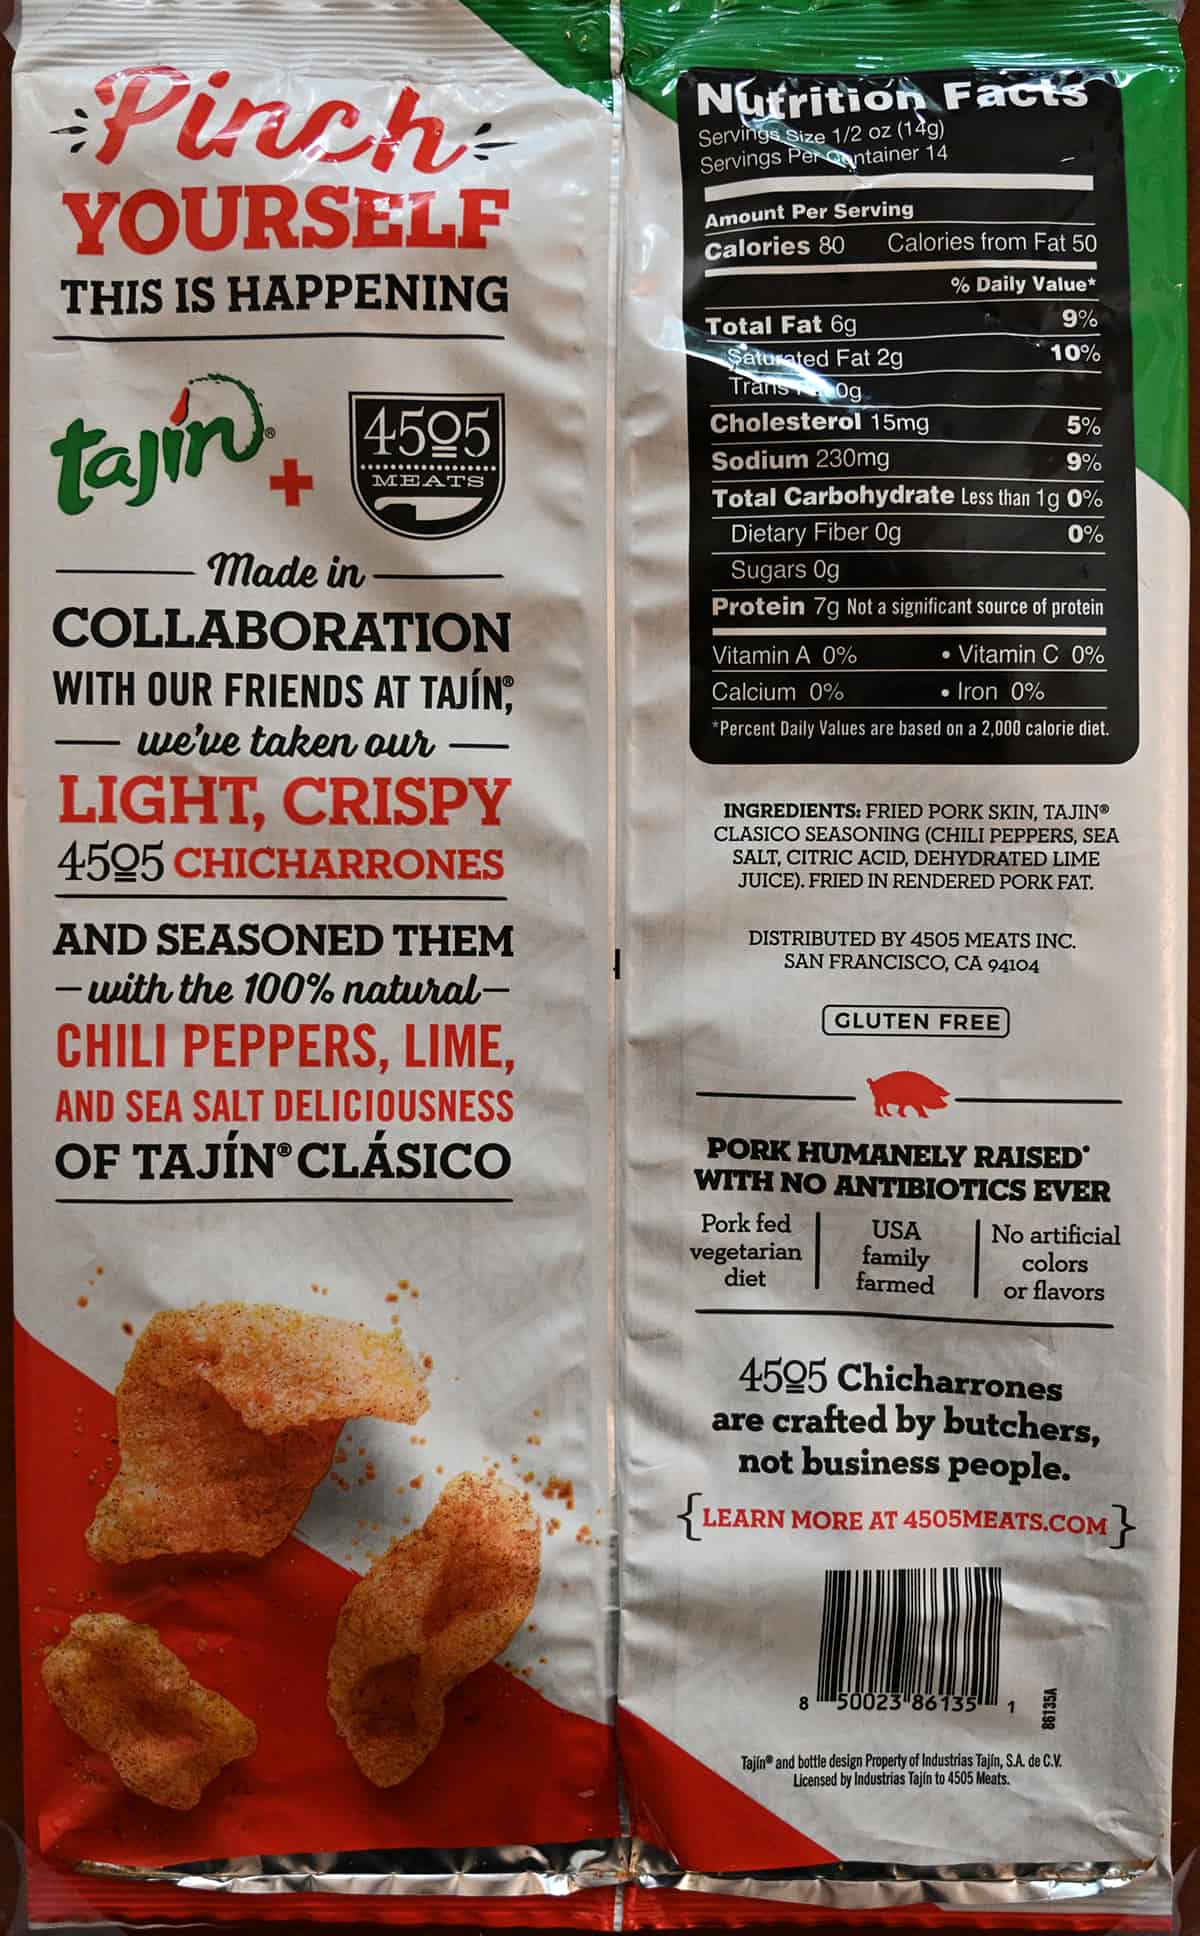 Closeup image of the back of the pork rinds bag showing nutrition facts, ingredients and product description.